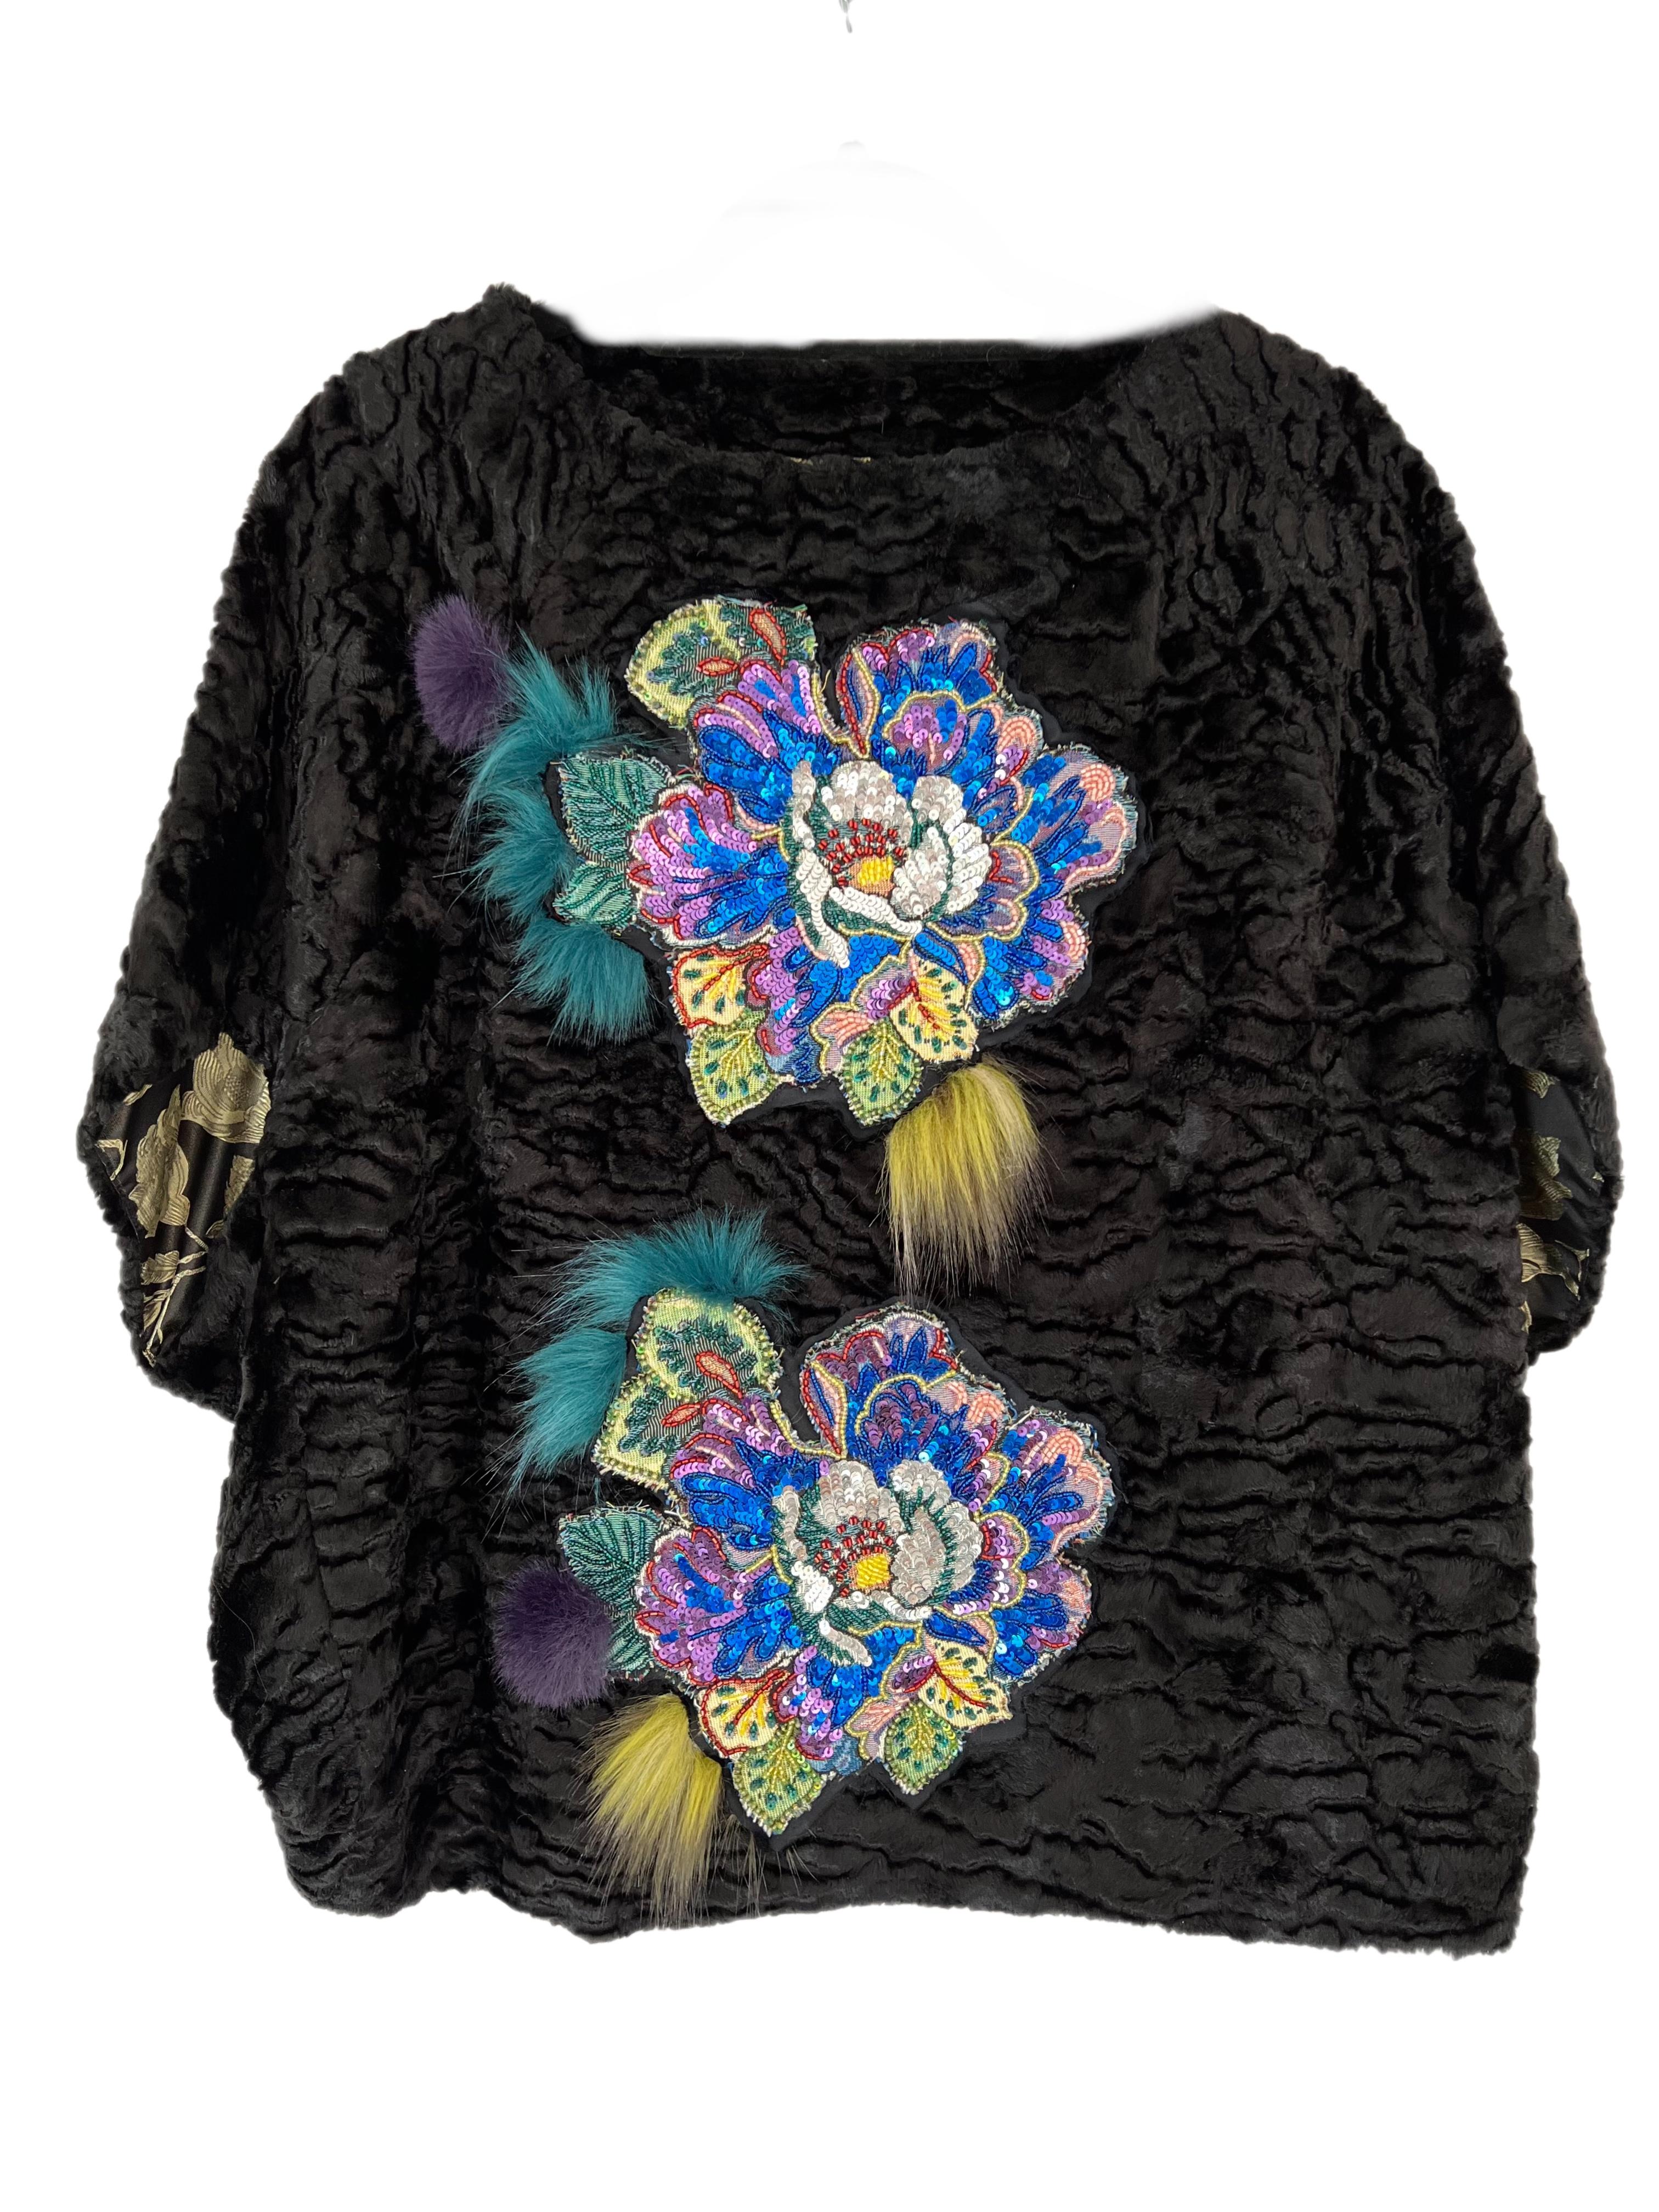 Pelush Black Faux Fur Astrakhan Broadtail Top With Embroidery Patches - One size For Sale 3